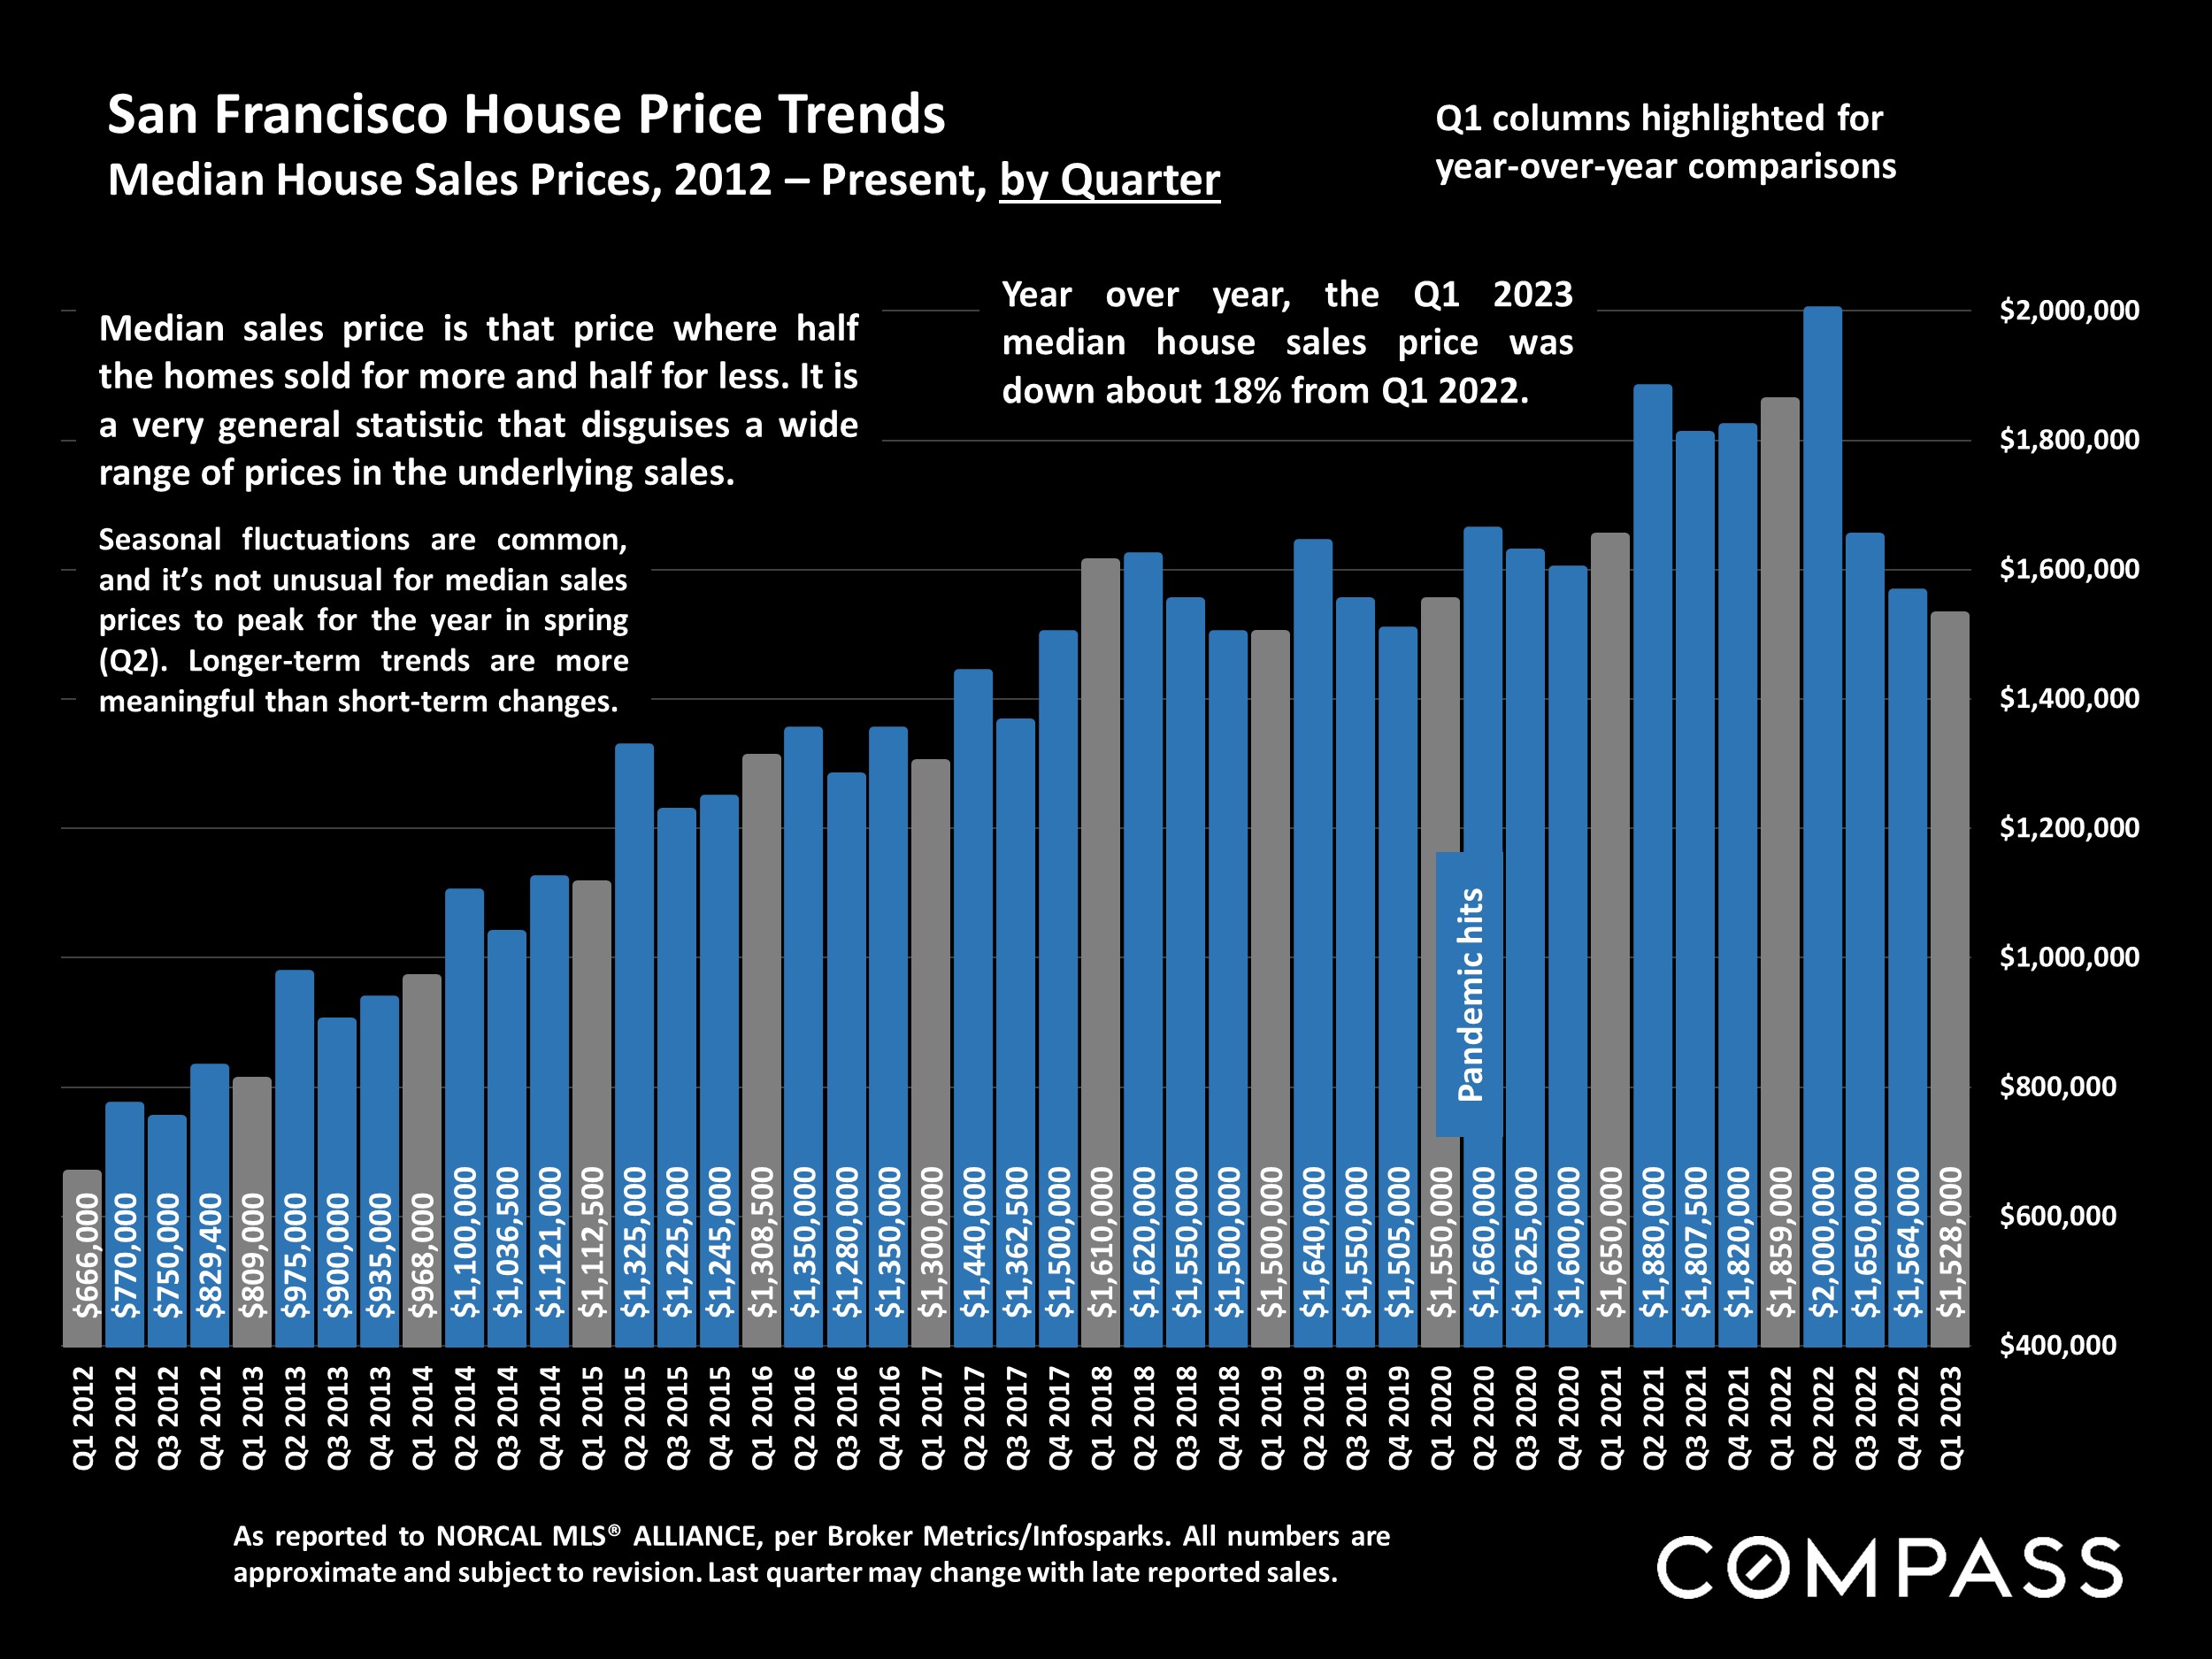 San Francisco House Price Trends Median House Sales Prices, 2012 - Present, by Quarter